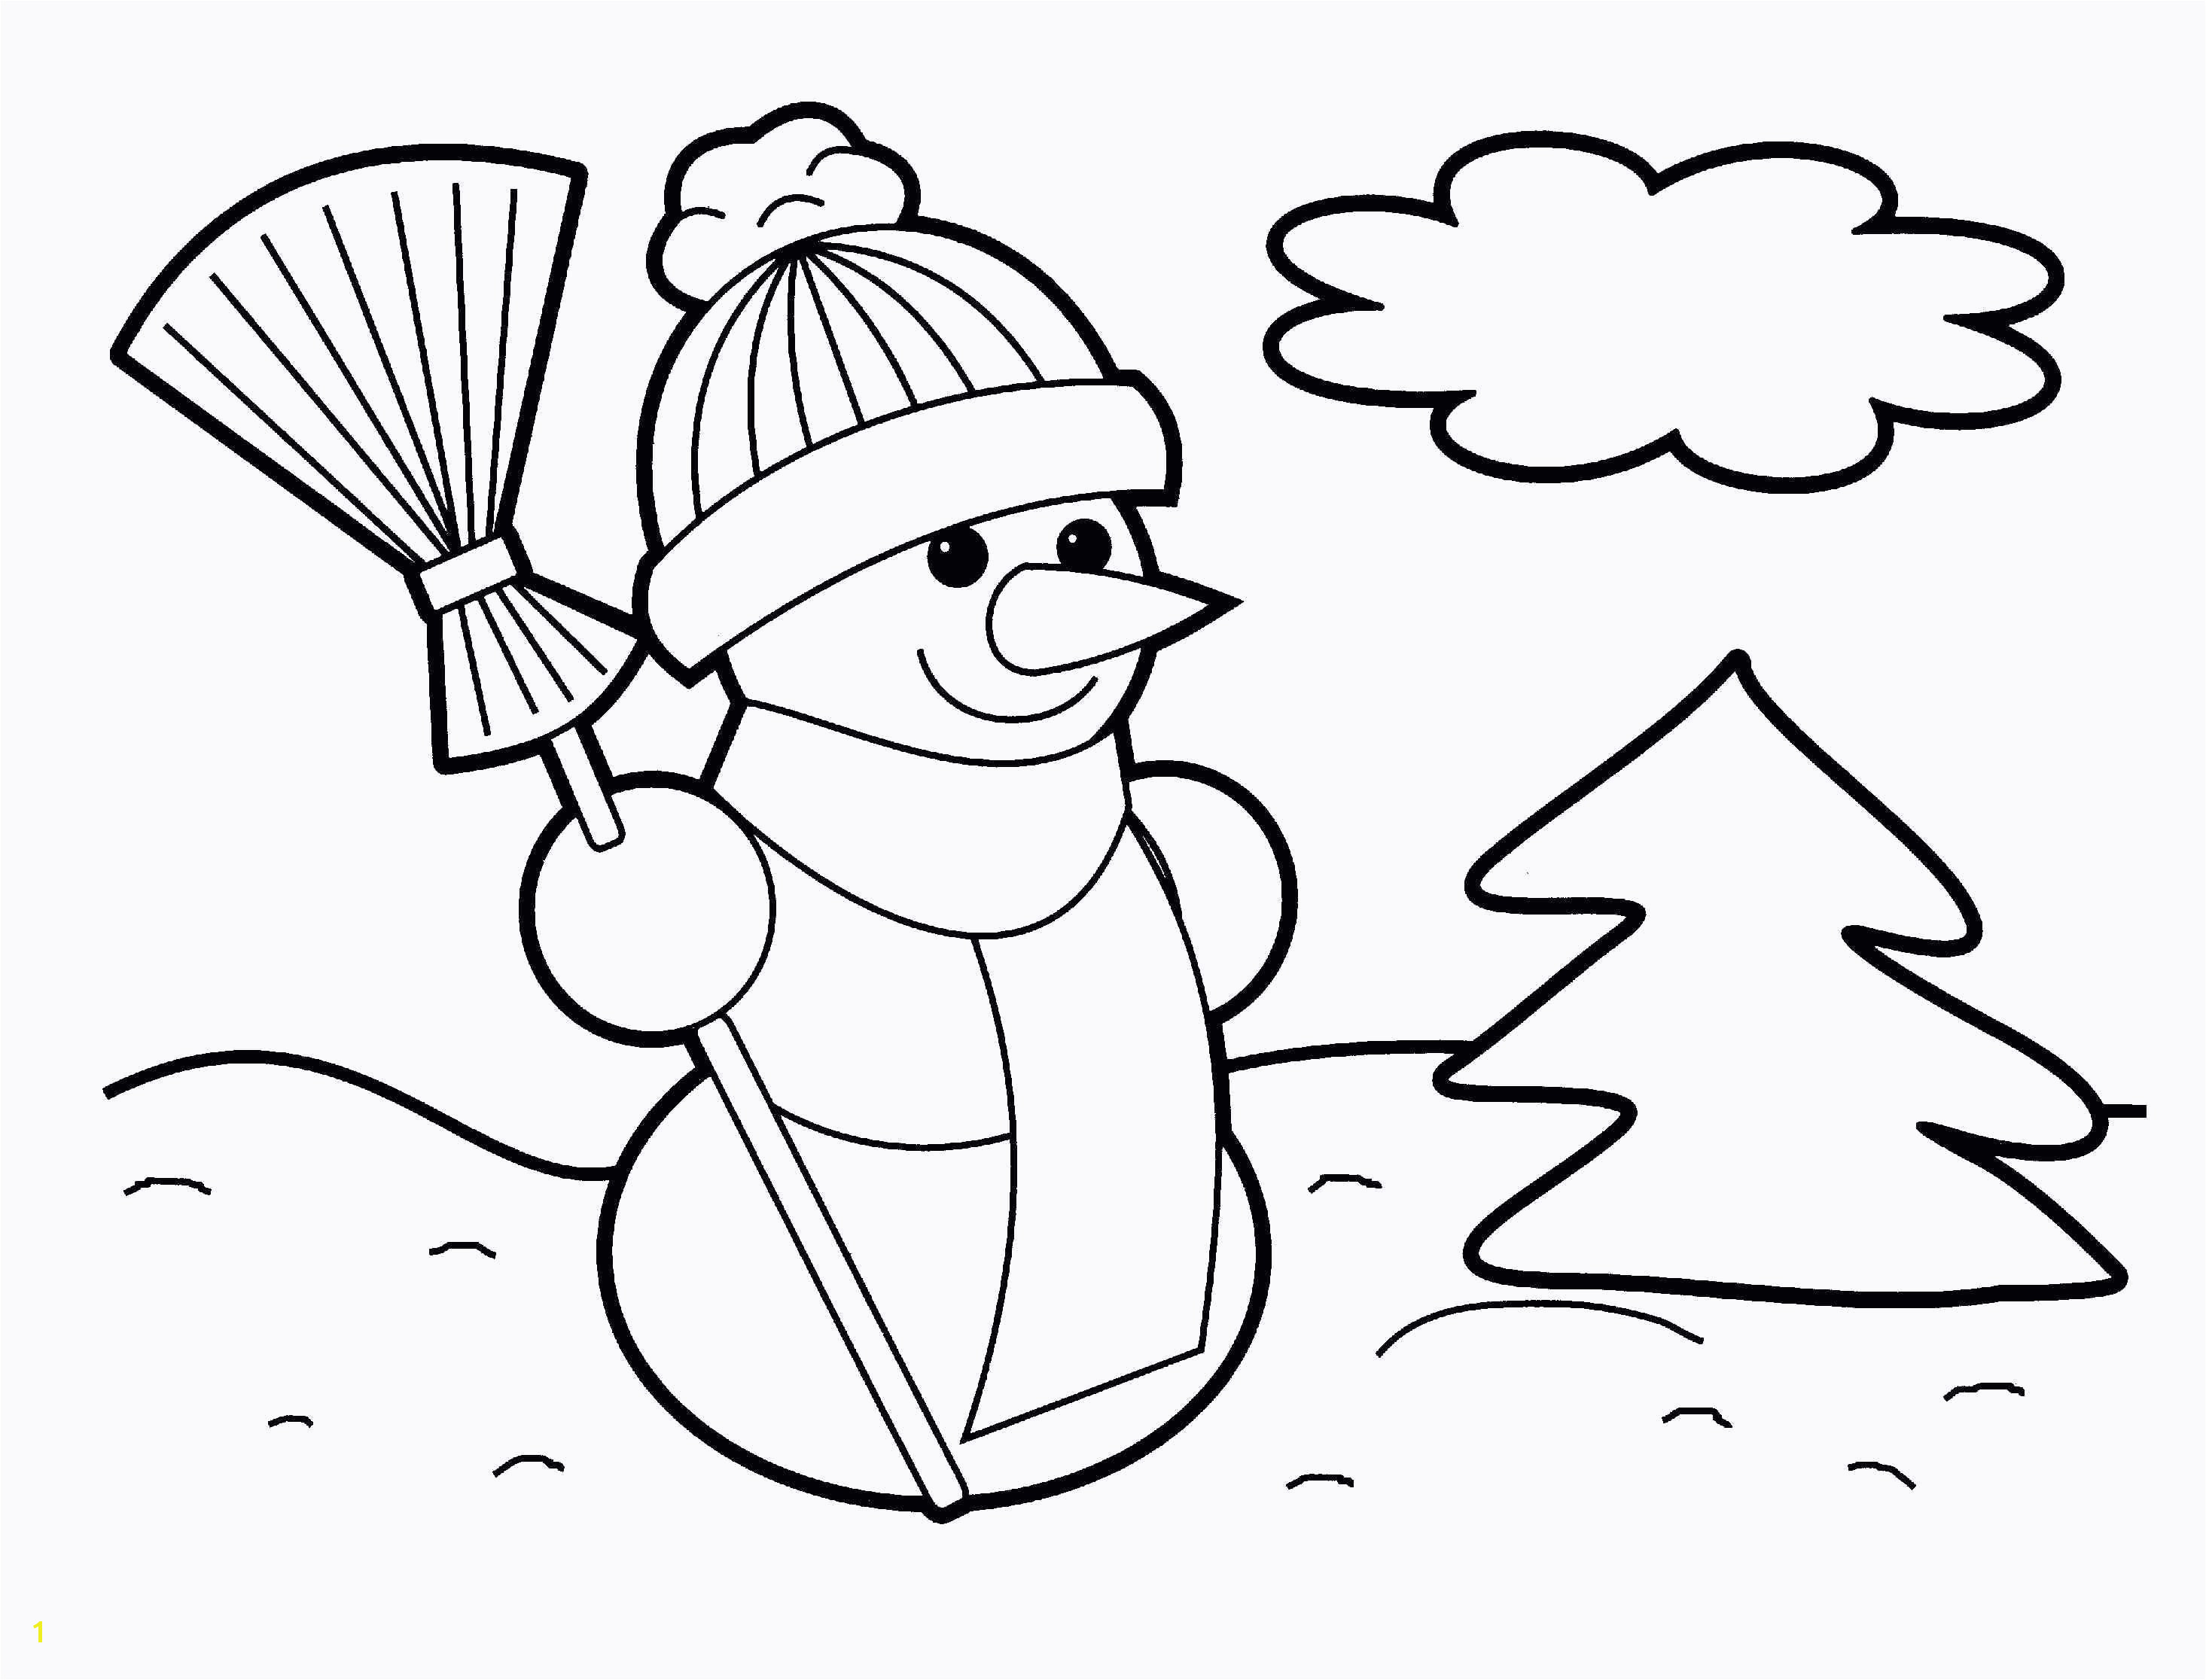 Printable Christmas Tree Coloring Pages Christmas Tree Coloring Pages for Kids Printable